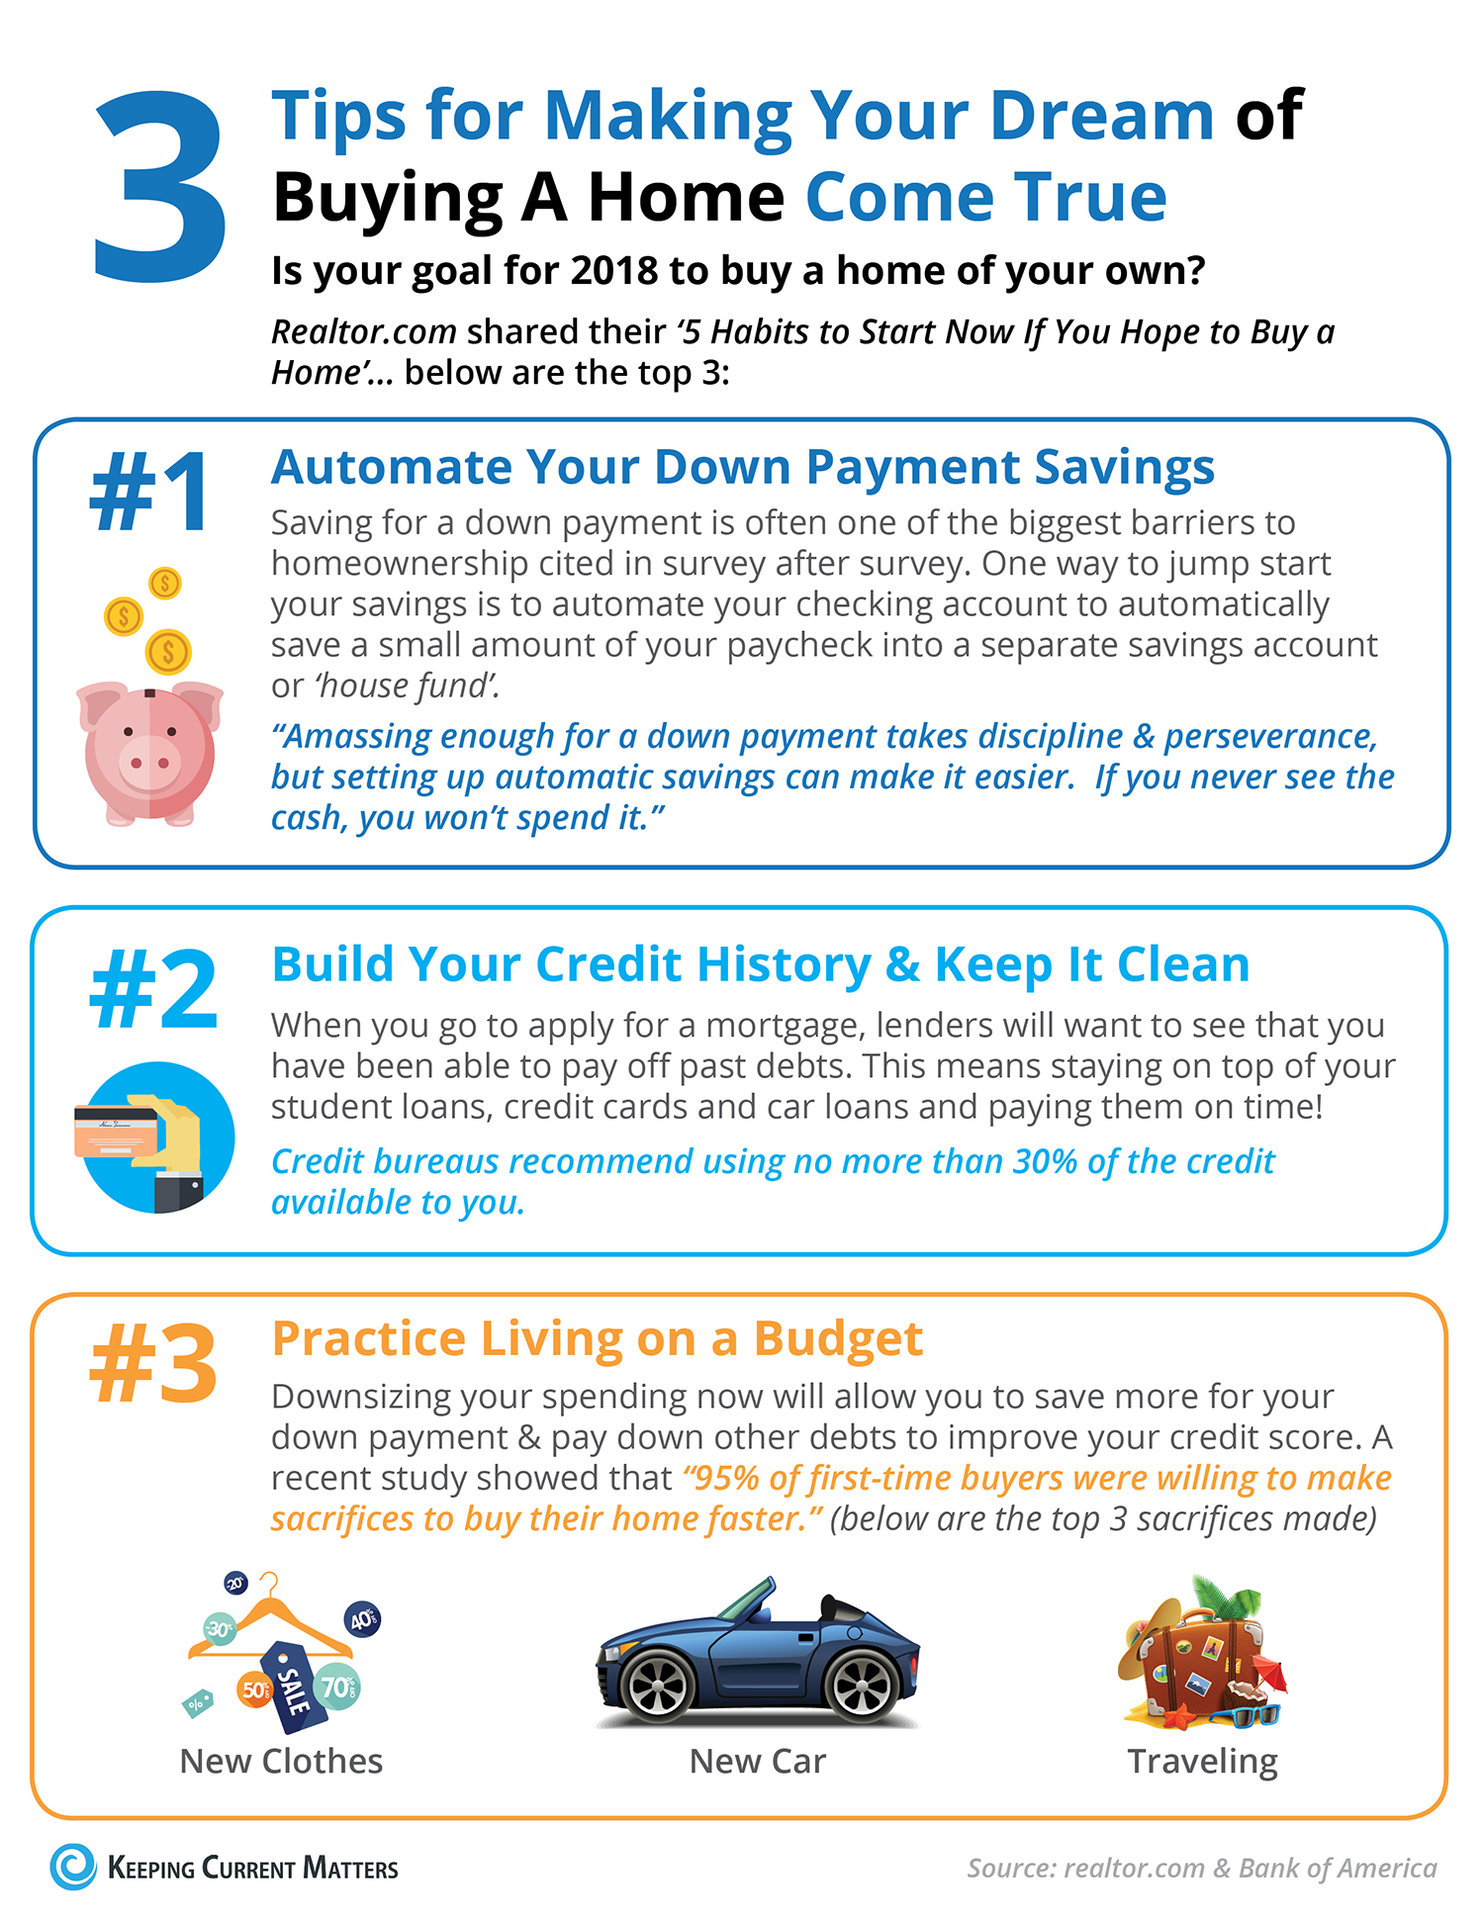 3 Tips for Making Your Dream Home a Reality [INFOGRAPHIC] | Keeping Current Matters